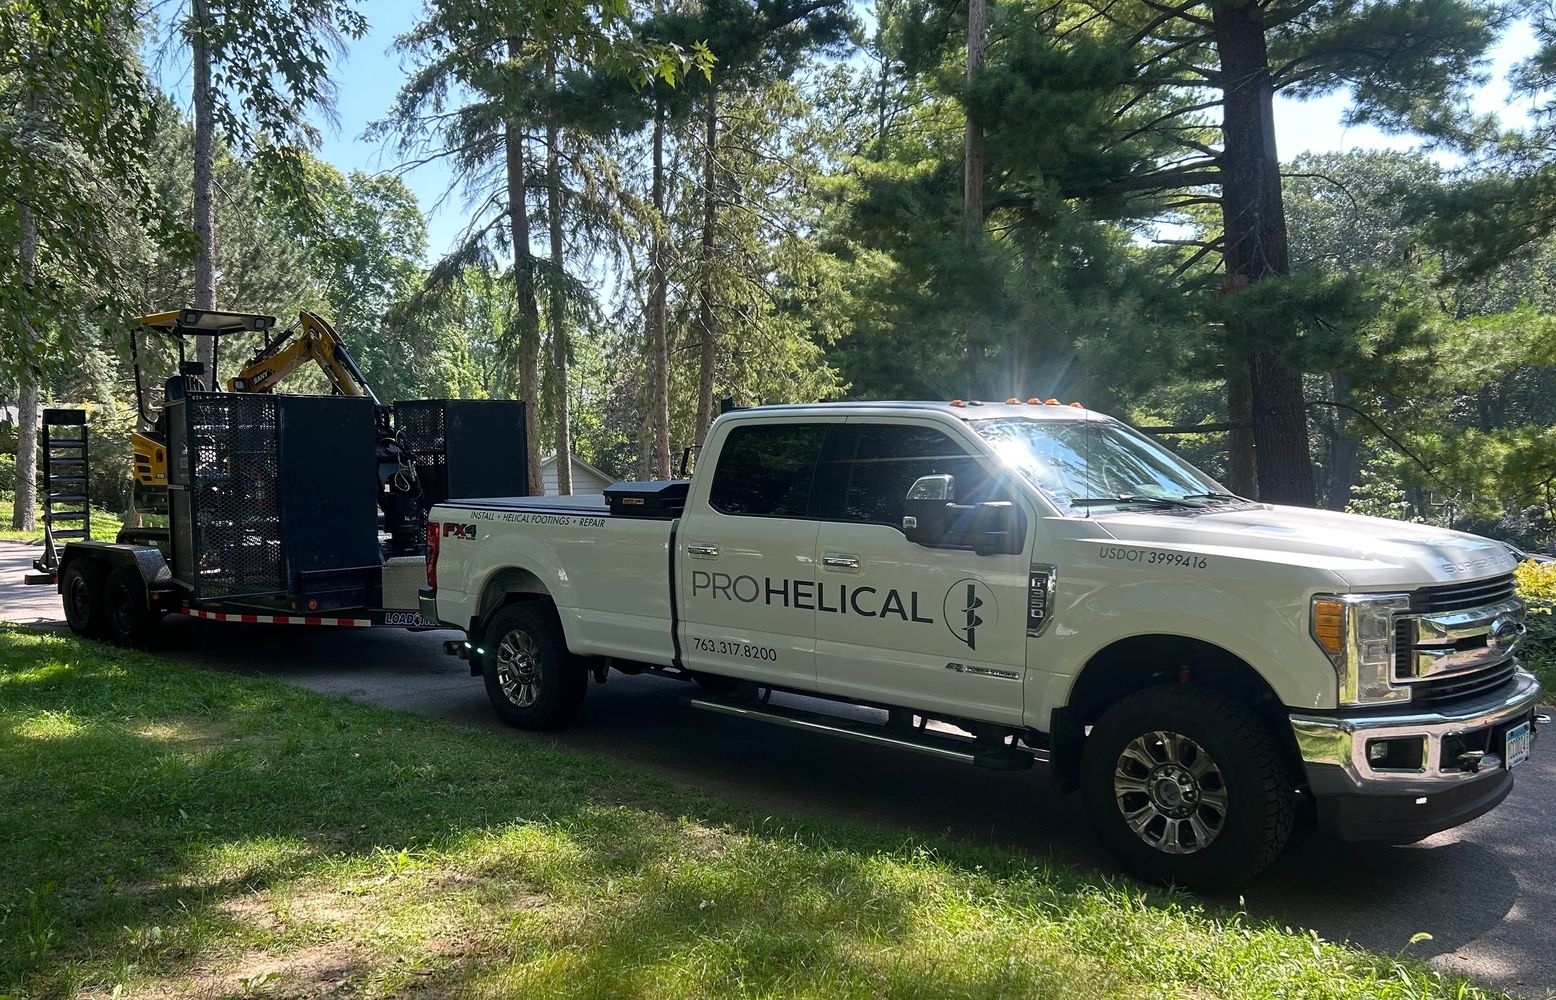 white Ford truck hauling helical equipment - Pro Helical helical piers